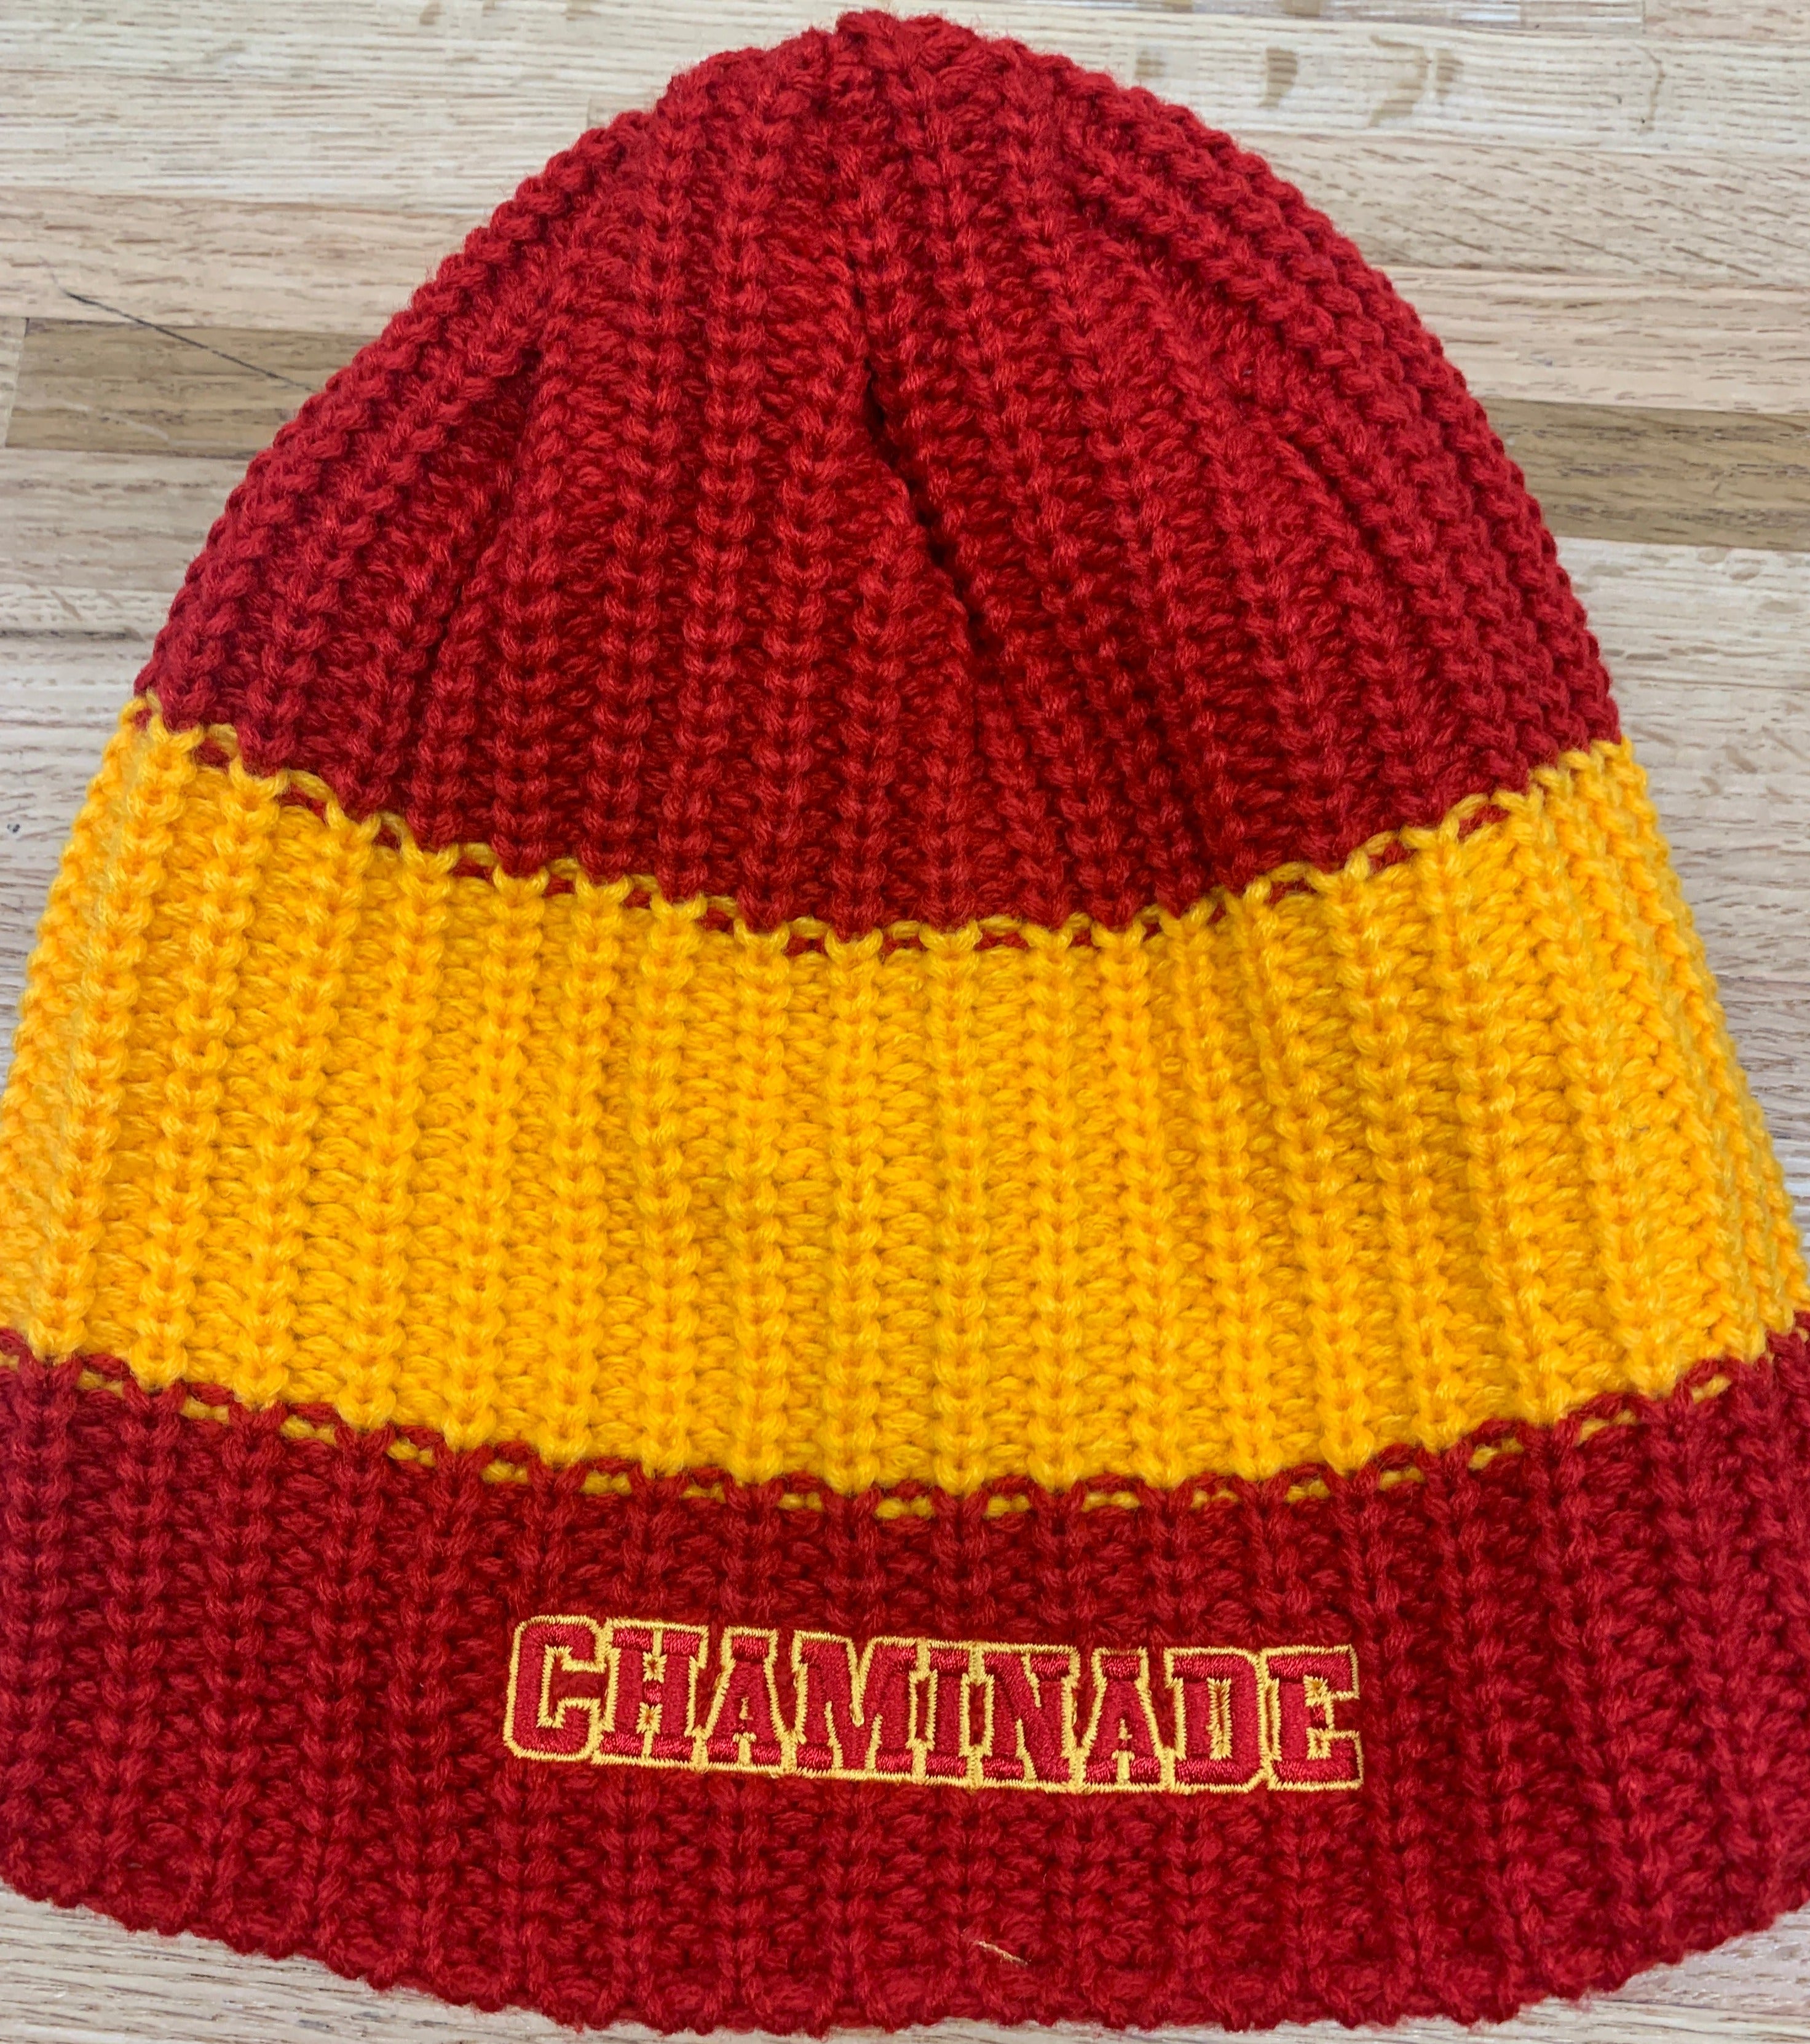 Legacy Winter Hat Beanie  - Red and Gold Striped - Final Sale